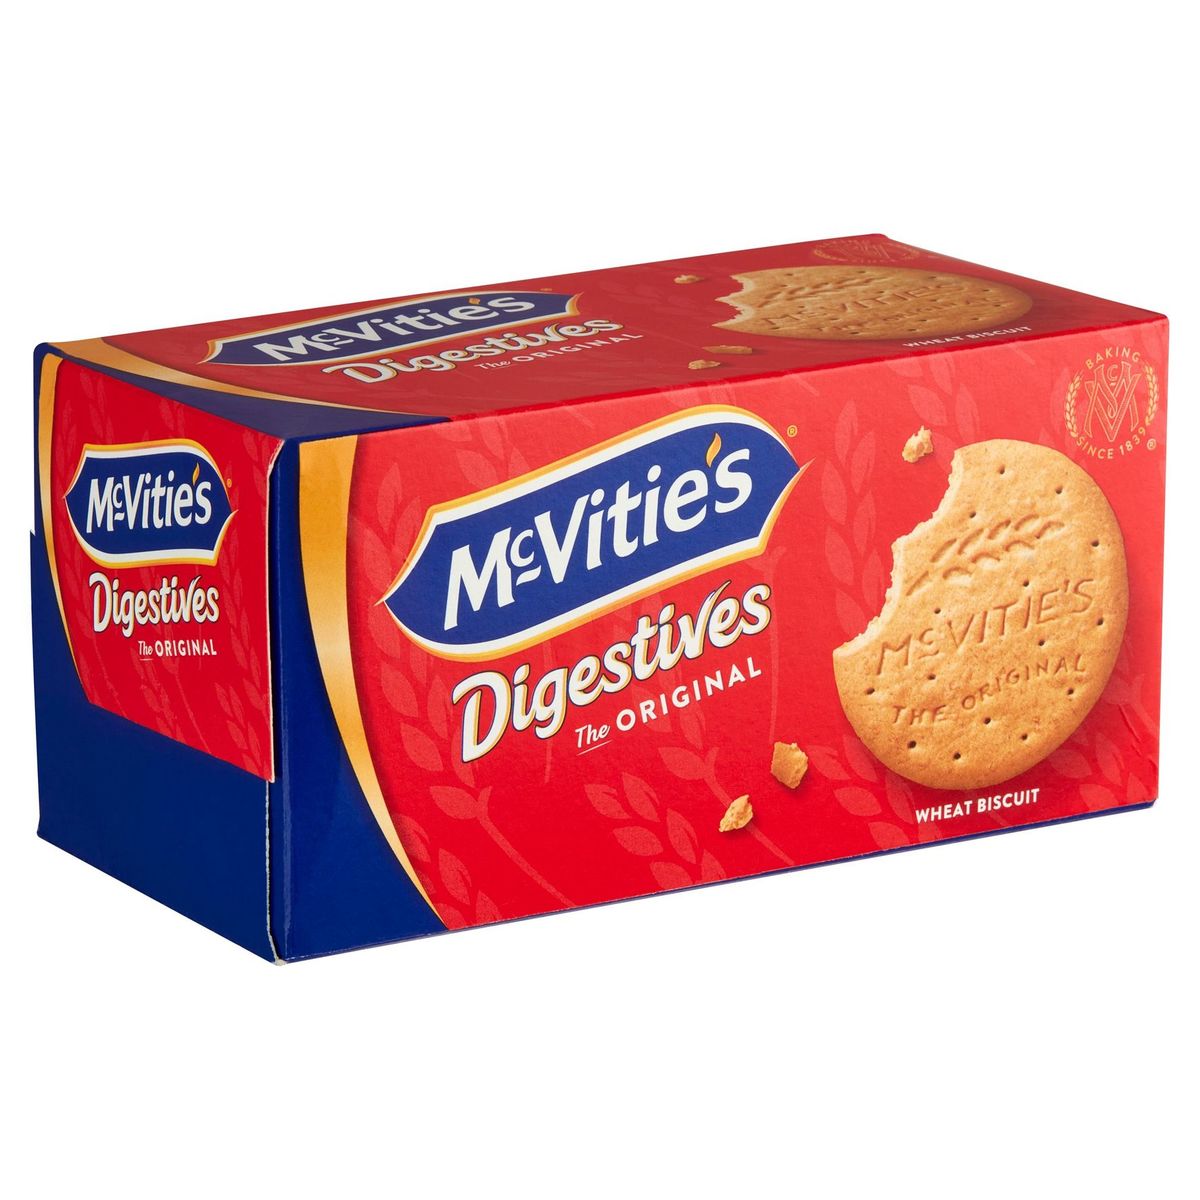 McVitie's Digestives The Original Wheat Biscuit 250 g